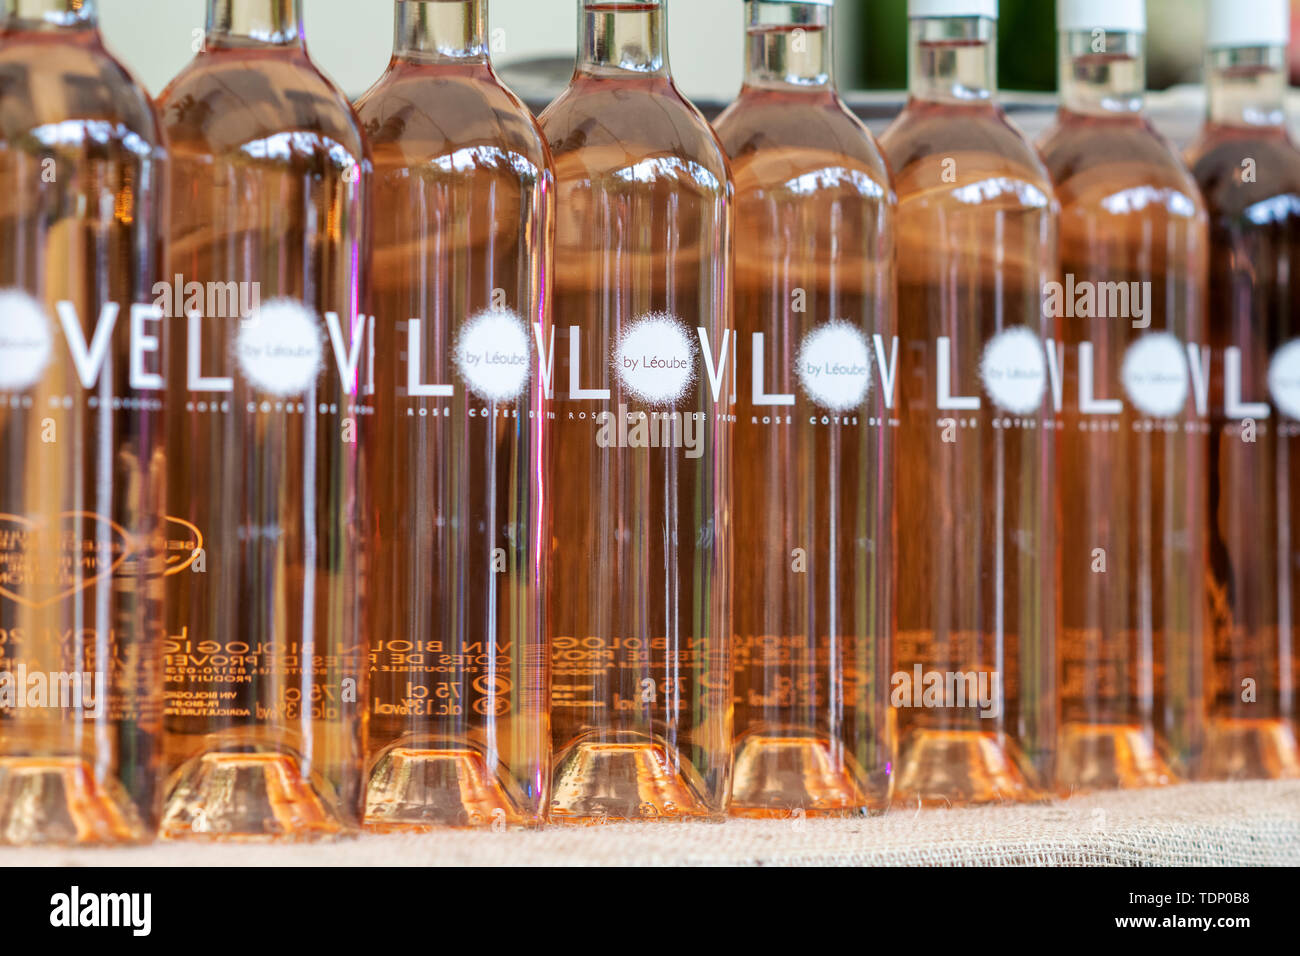 Love by Leoube Organic Provence Rose Wine bottles at Daylesford Organic farm summer festival. Daylesford, Gloucestershire, Cotswolds, UK Stock Photo